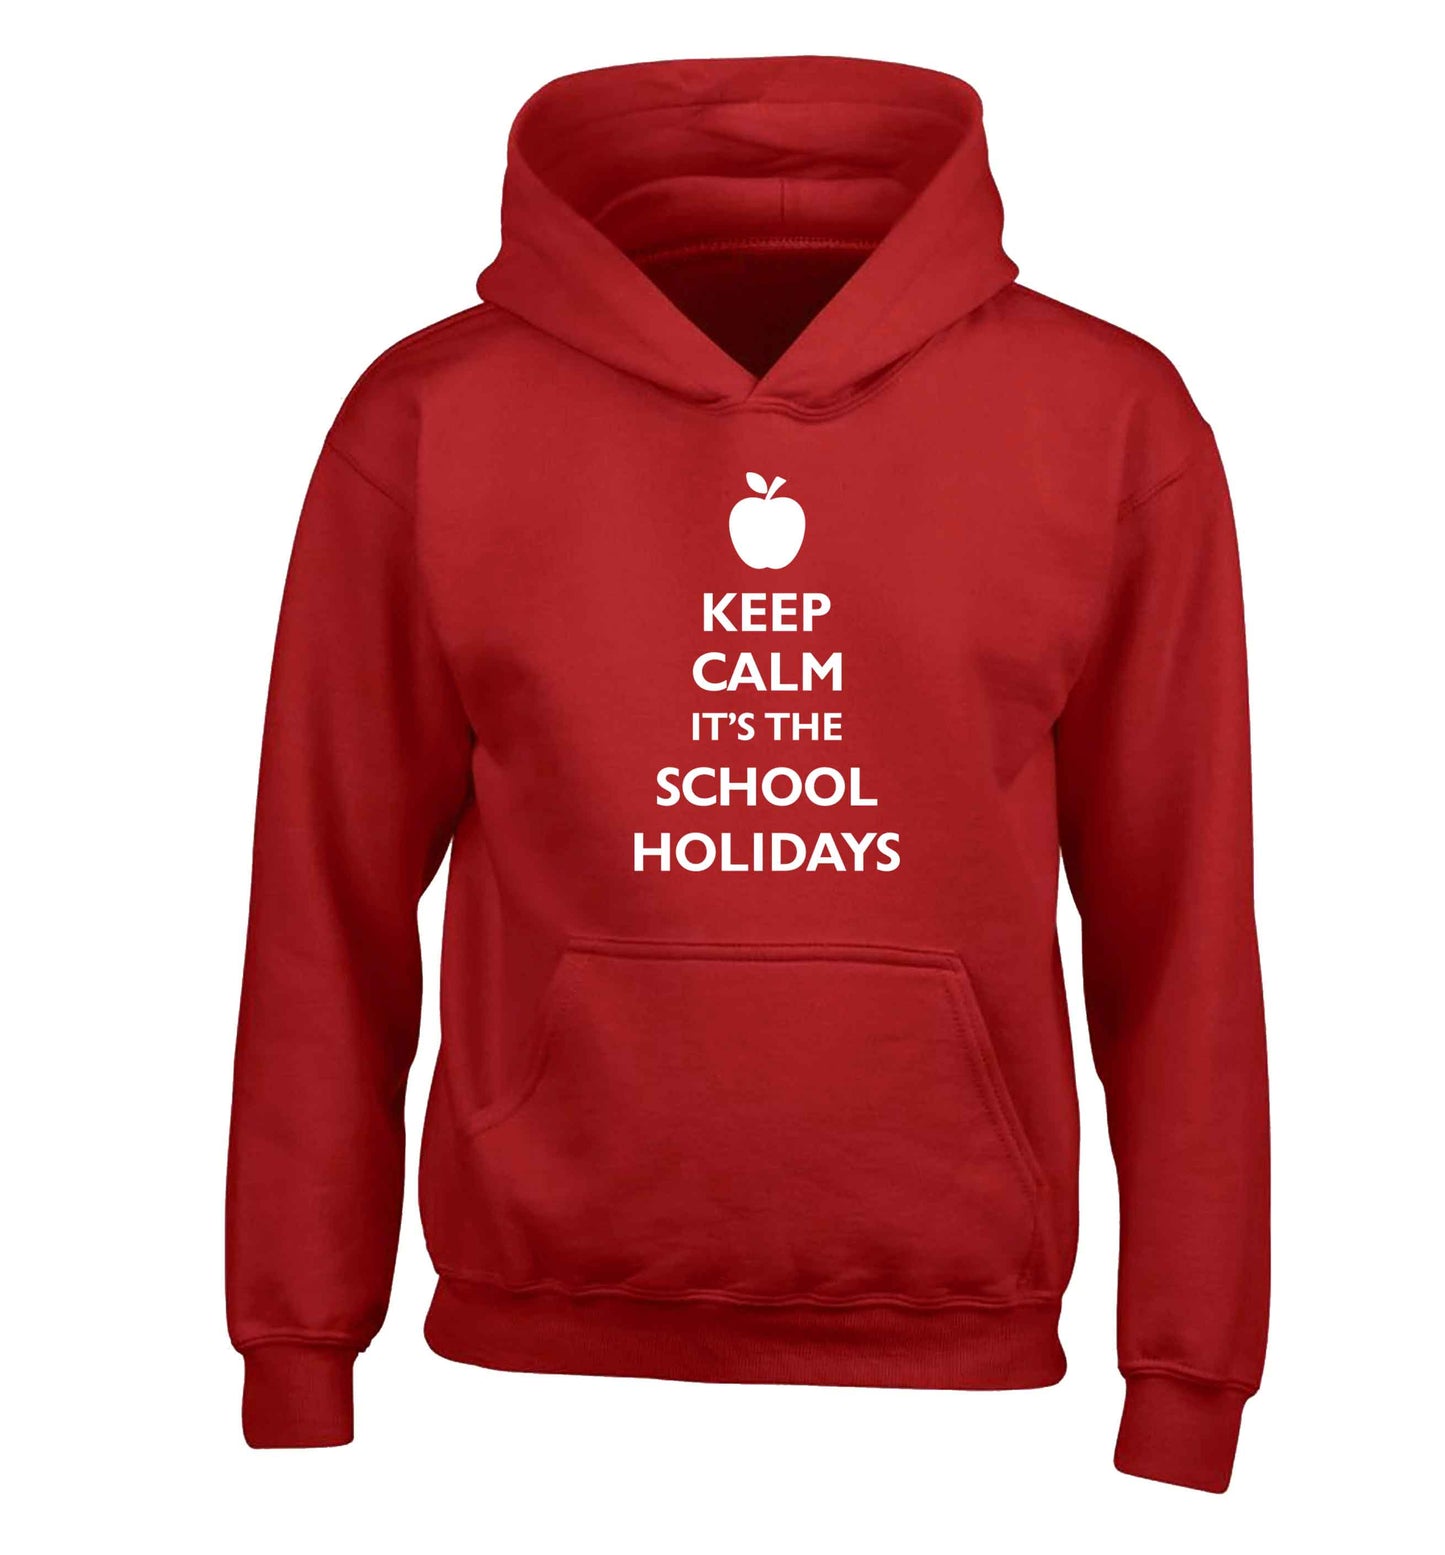 Keep calm it's the school holidays children's red hoodie 12-13 Years